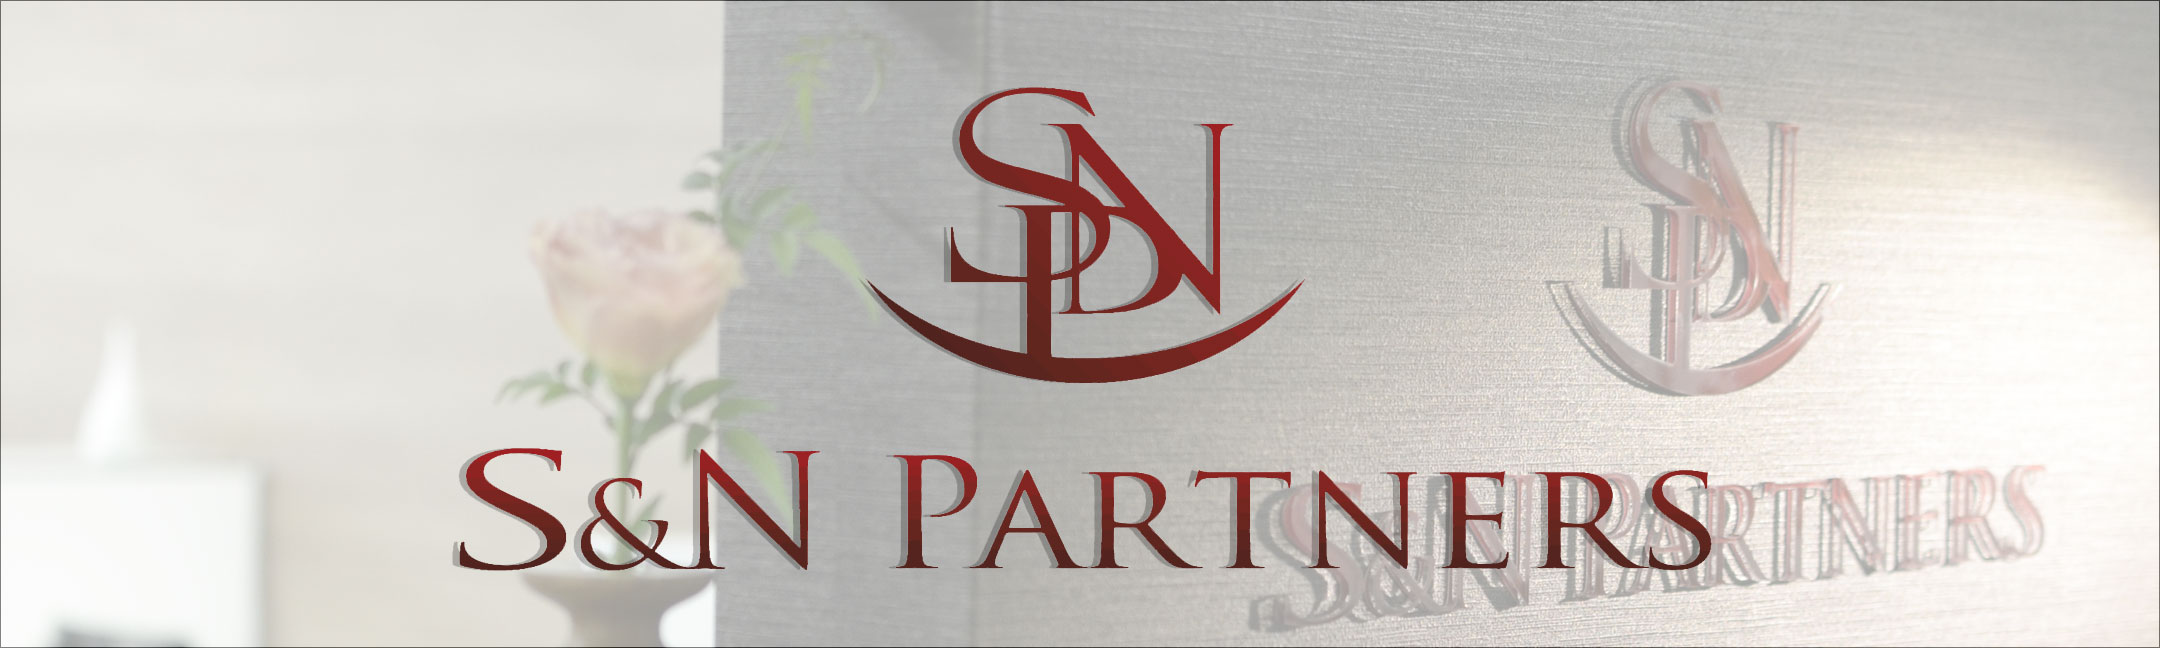 S & N Partners LAW AND ACCOUNTING OFFICE